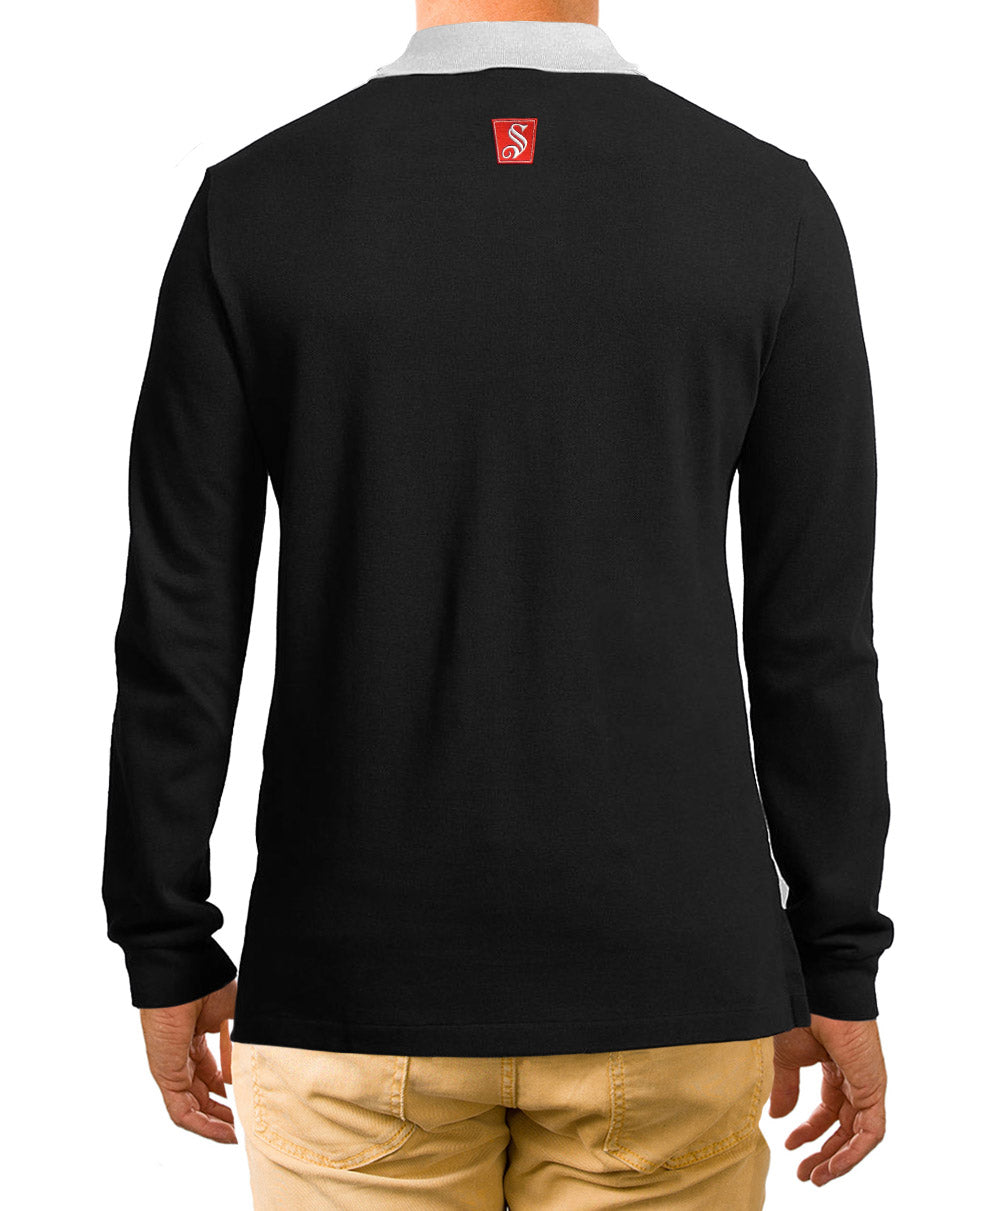 Steinlager Long Sleeve Rugby Jersey -  Beer Gear Apparel & Merchandise - Speights - Lion Red - VB - Tokyo Dy merch